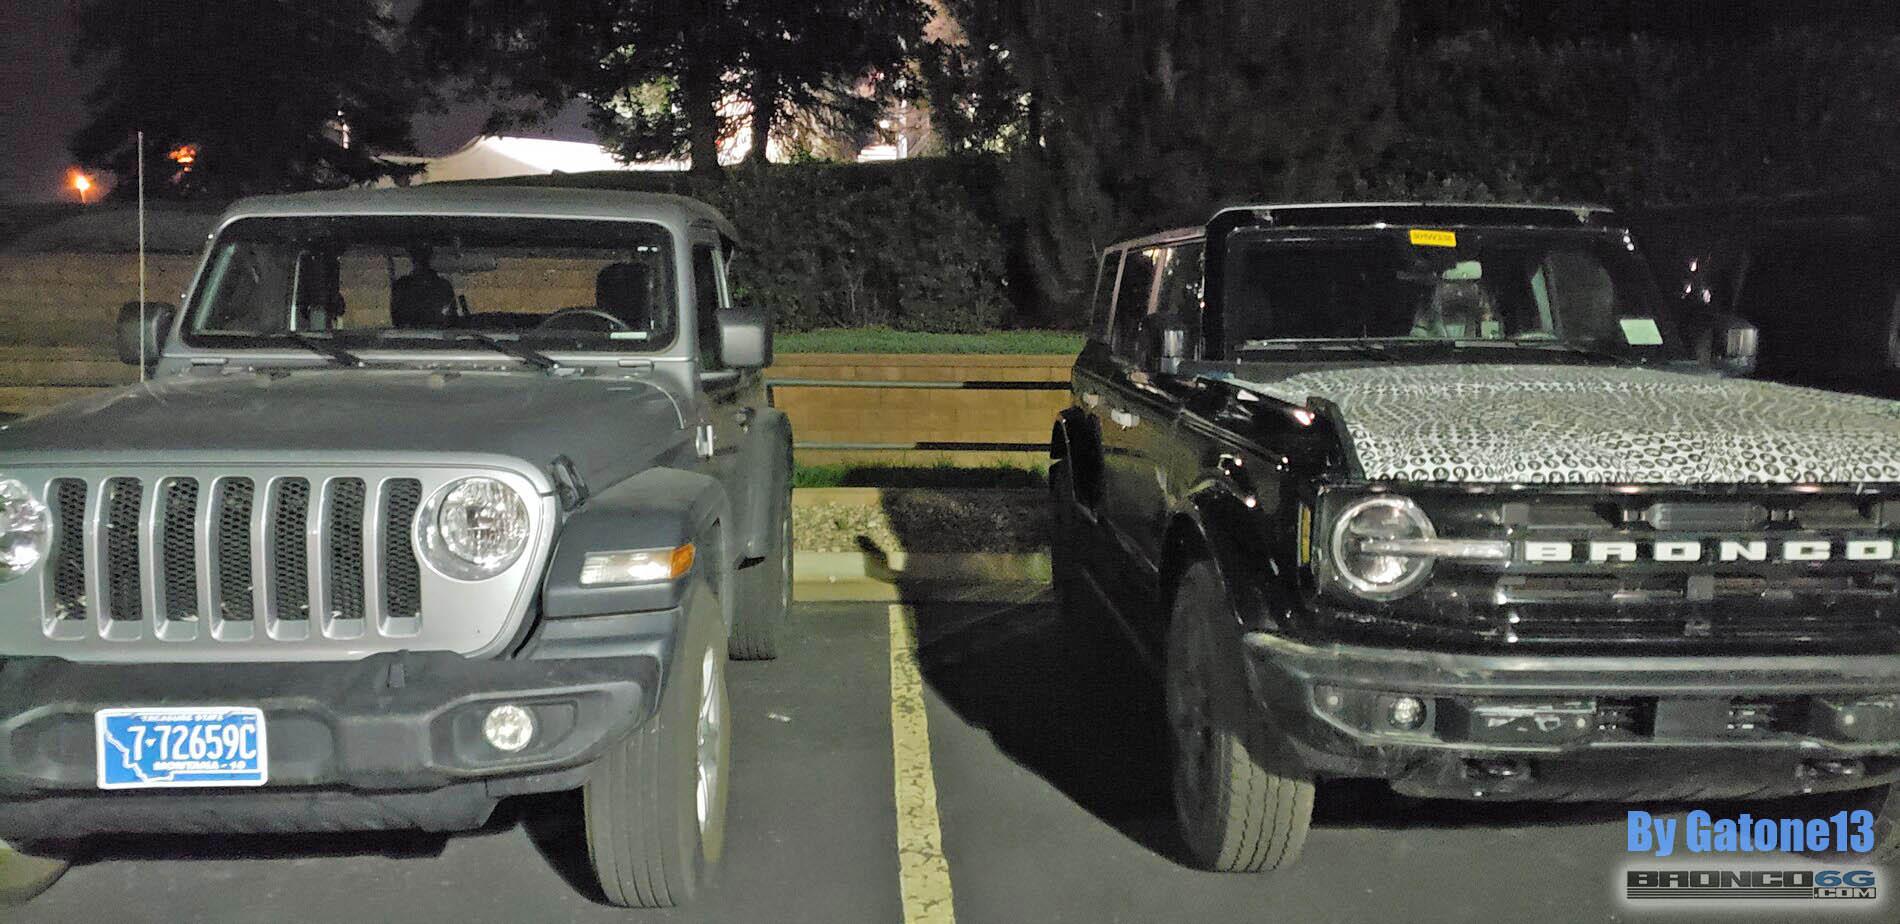 Ford Bronco Side-by-Side Sighting: Sasquatch vs Non-Sasquatch Broncos and Jeep Wrangler Comparison Ford Bronco vs Jeep Wrangler side by side comparison 2